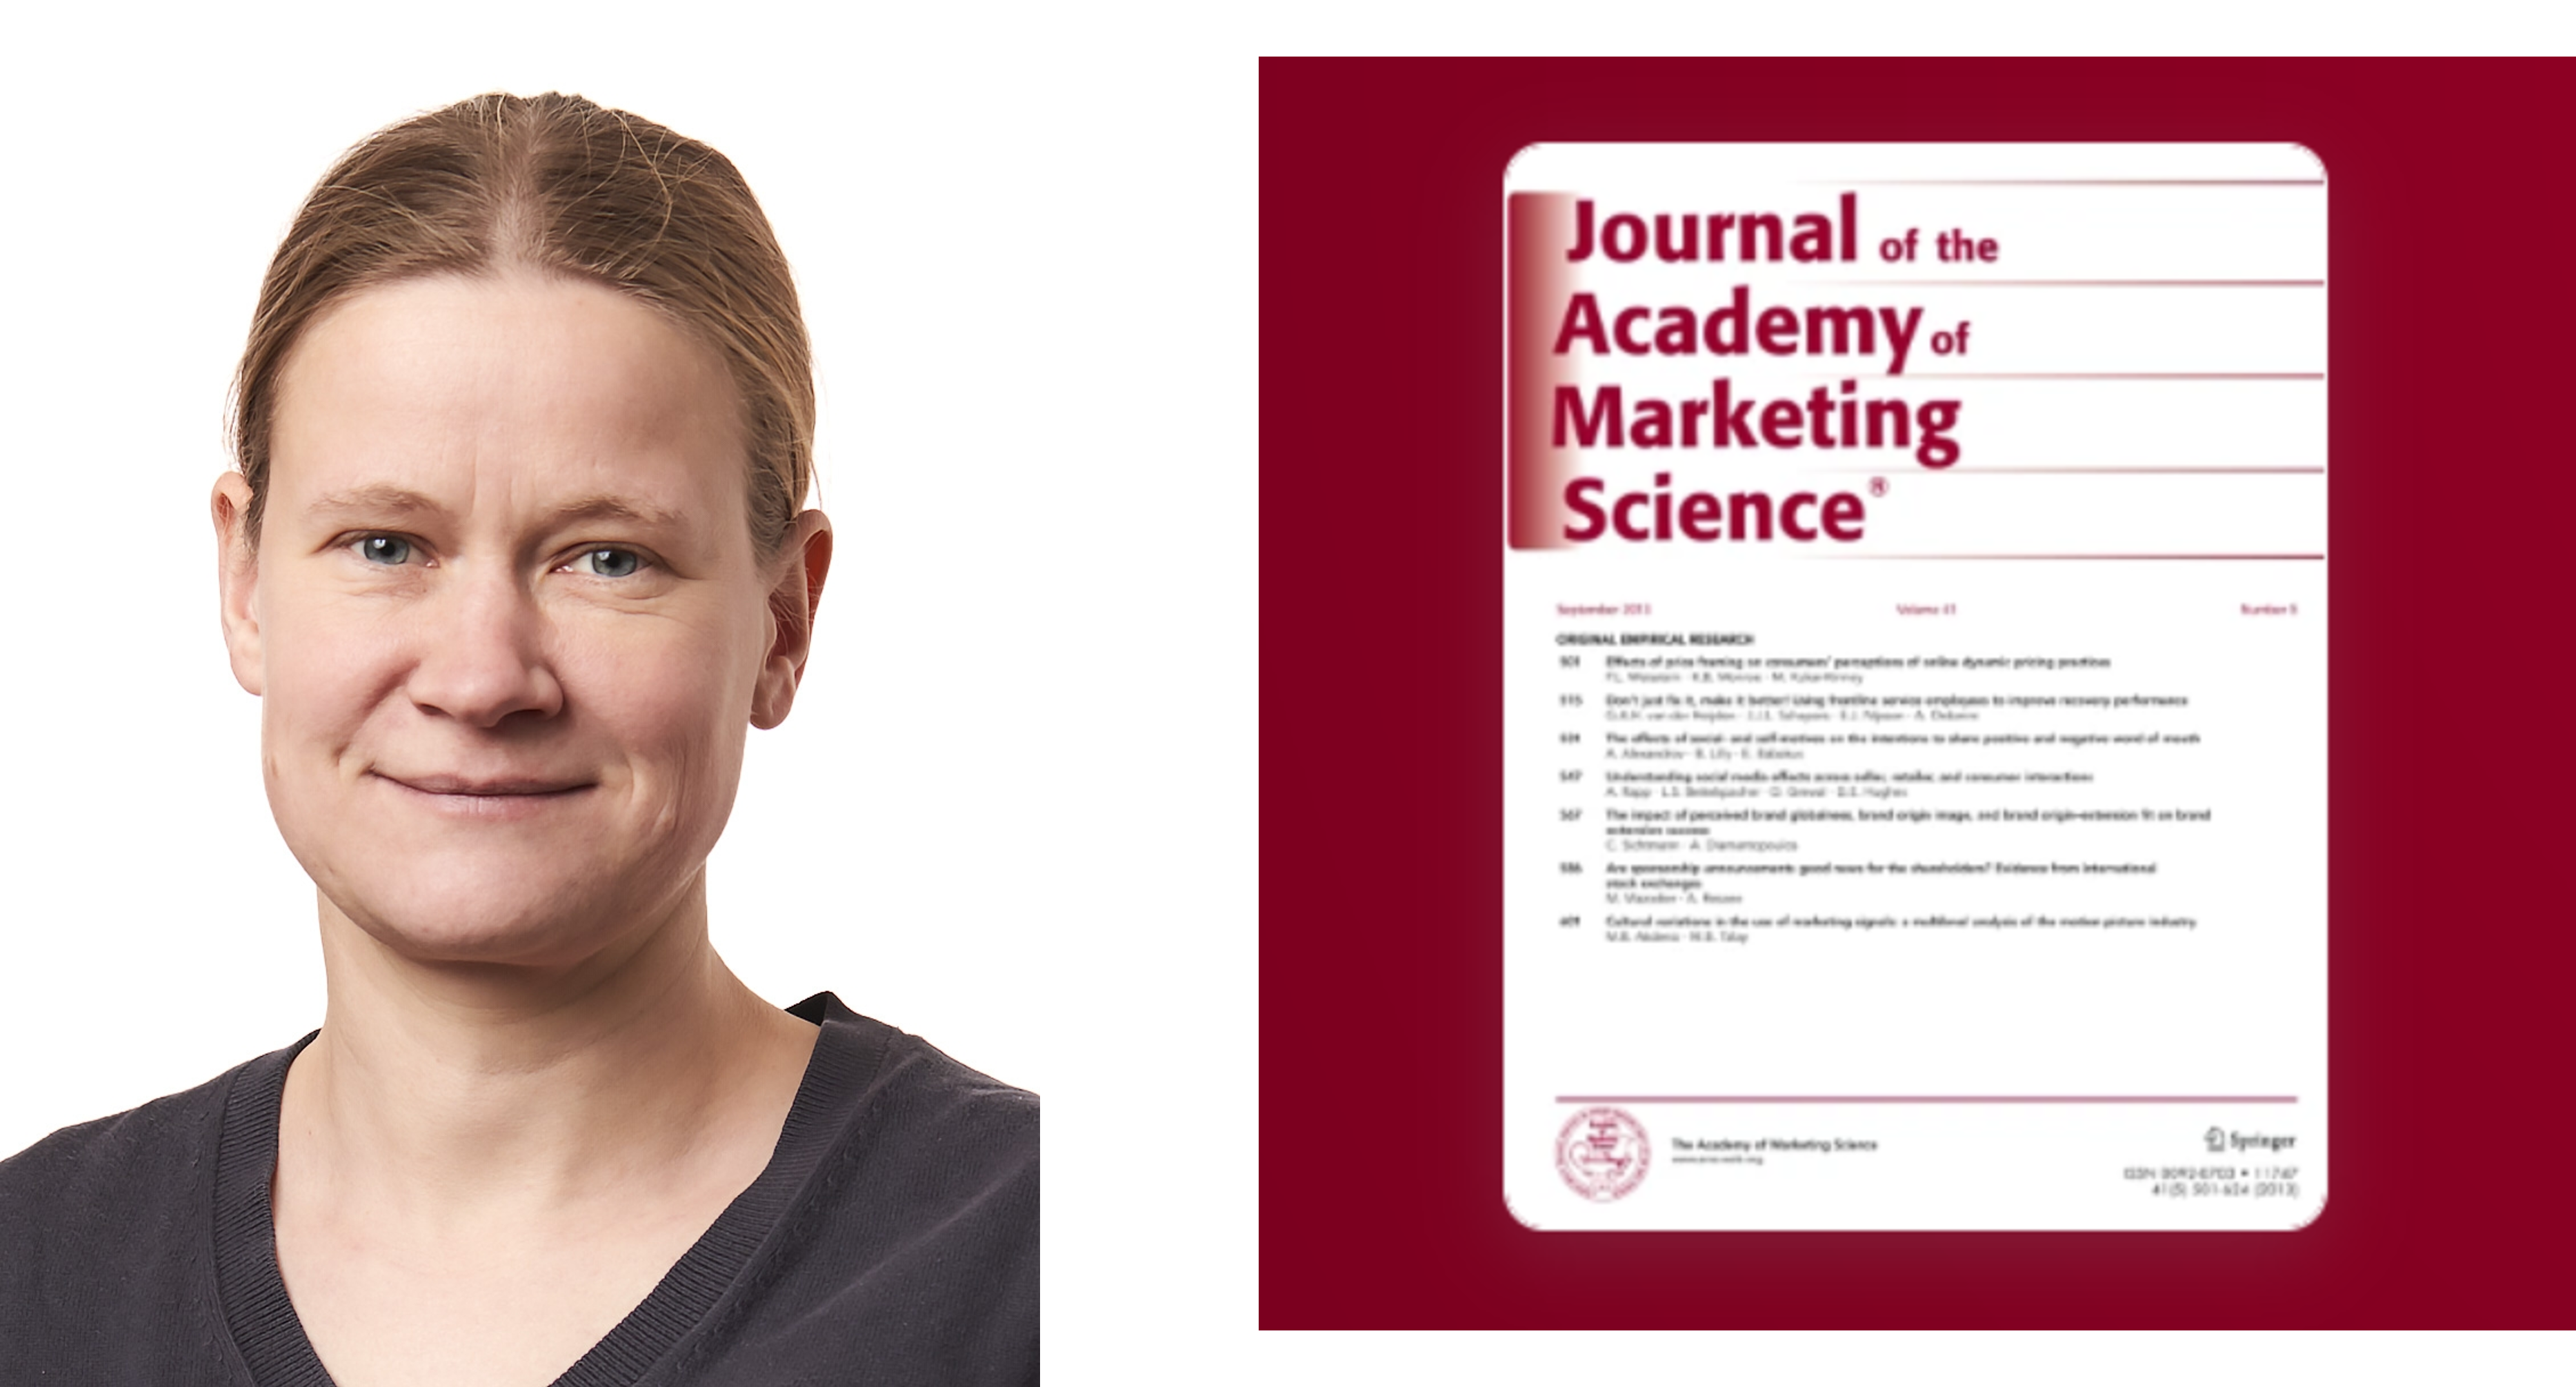 Woman smiling at camera and journal article cover